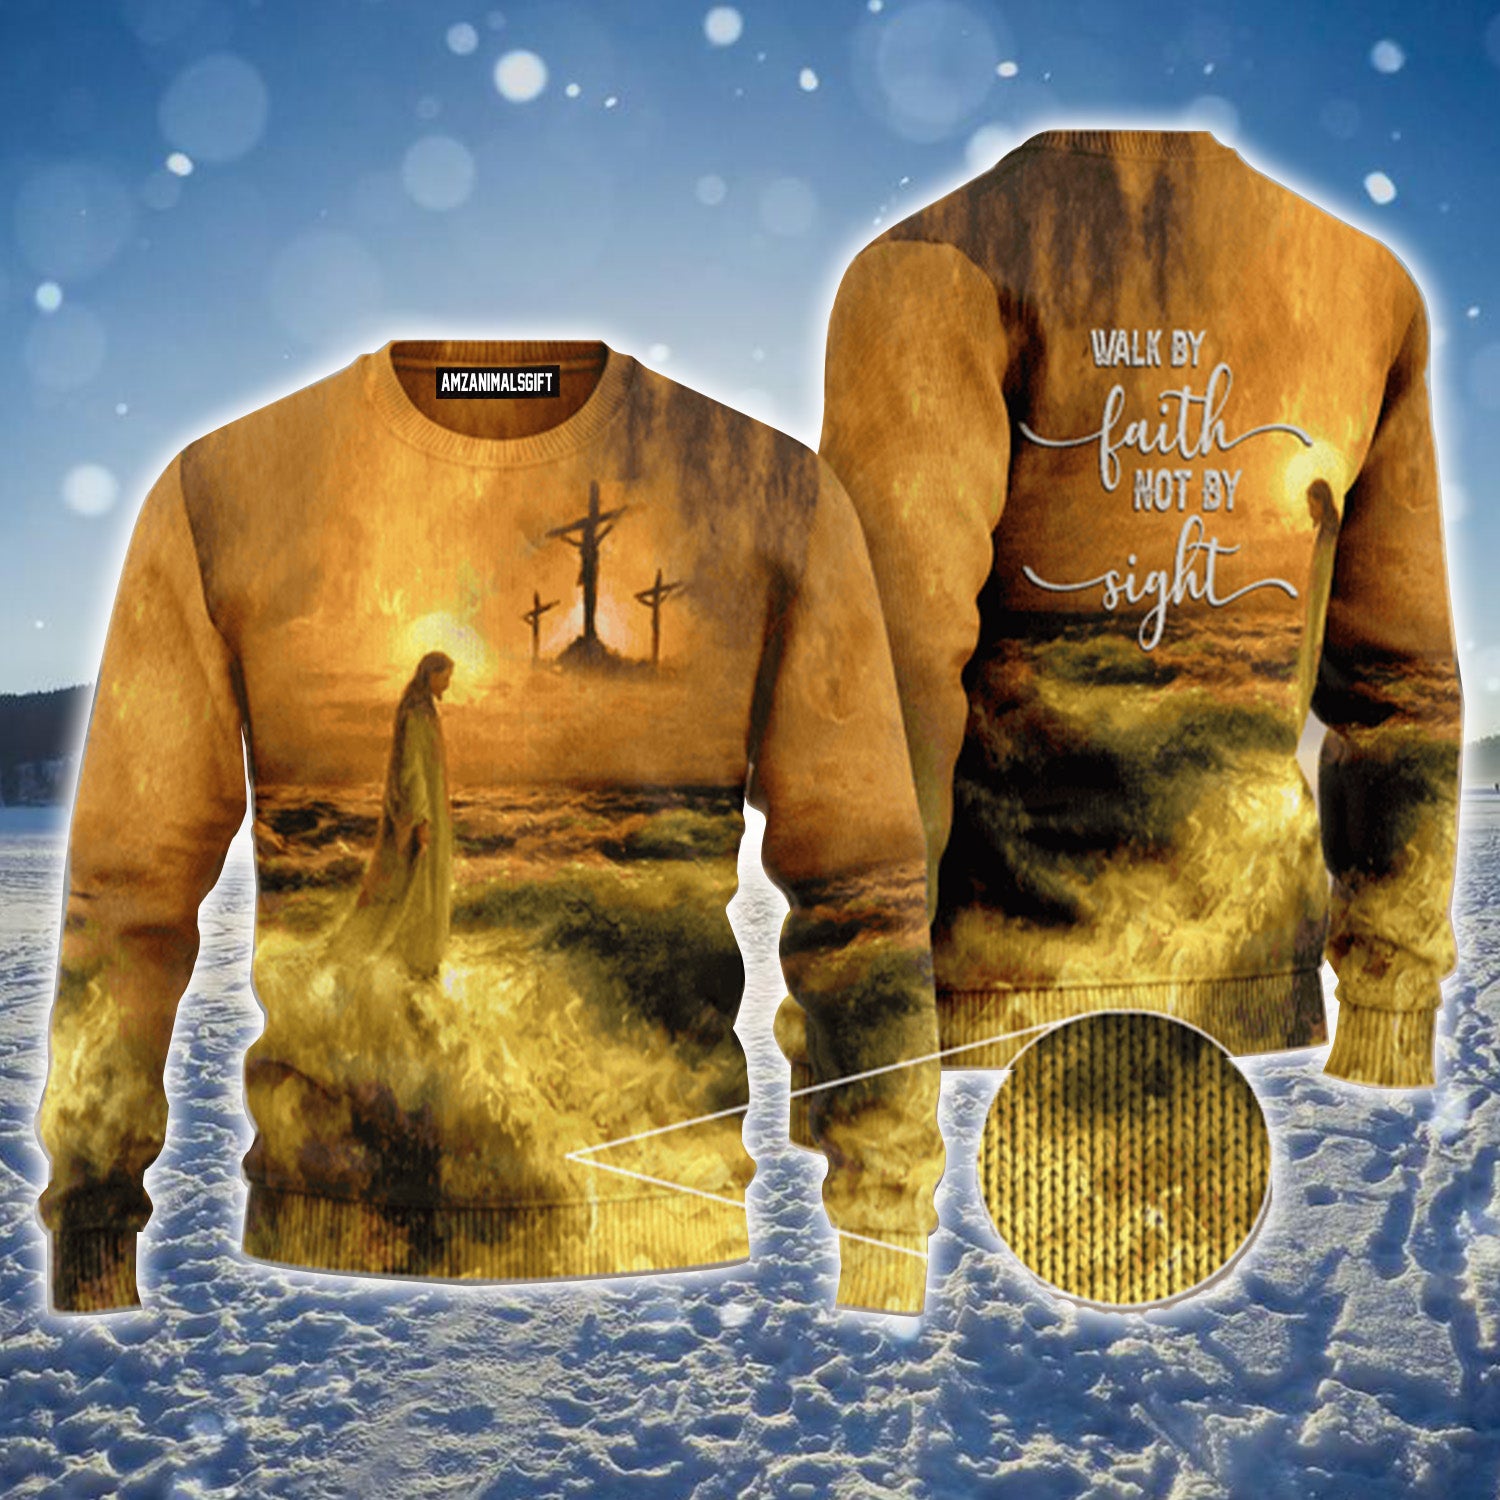 Cross Jesus Walk By Faith Not By Sight Urly Sweater, Christmas Sweater For Men & Women - Perfect Gift For New Year, Winter, Christmas